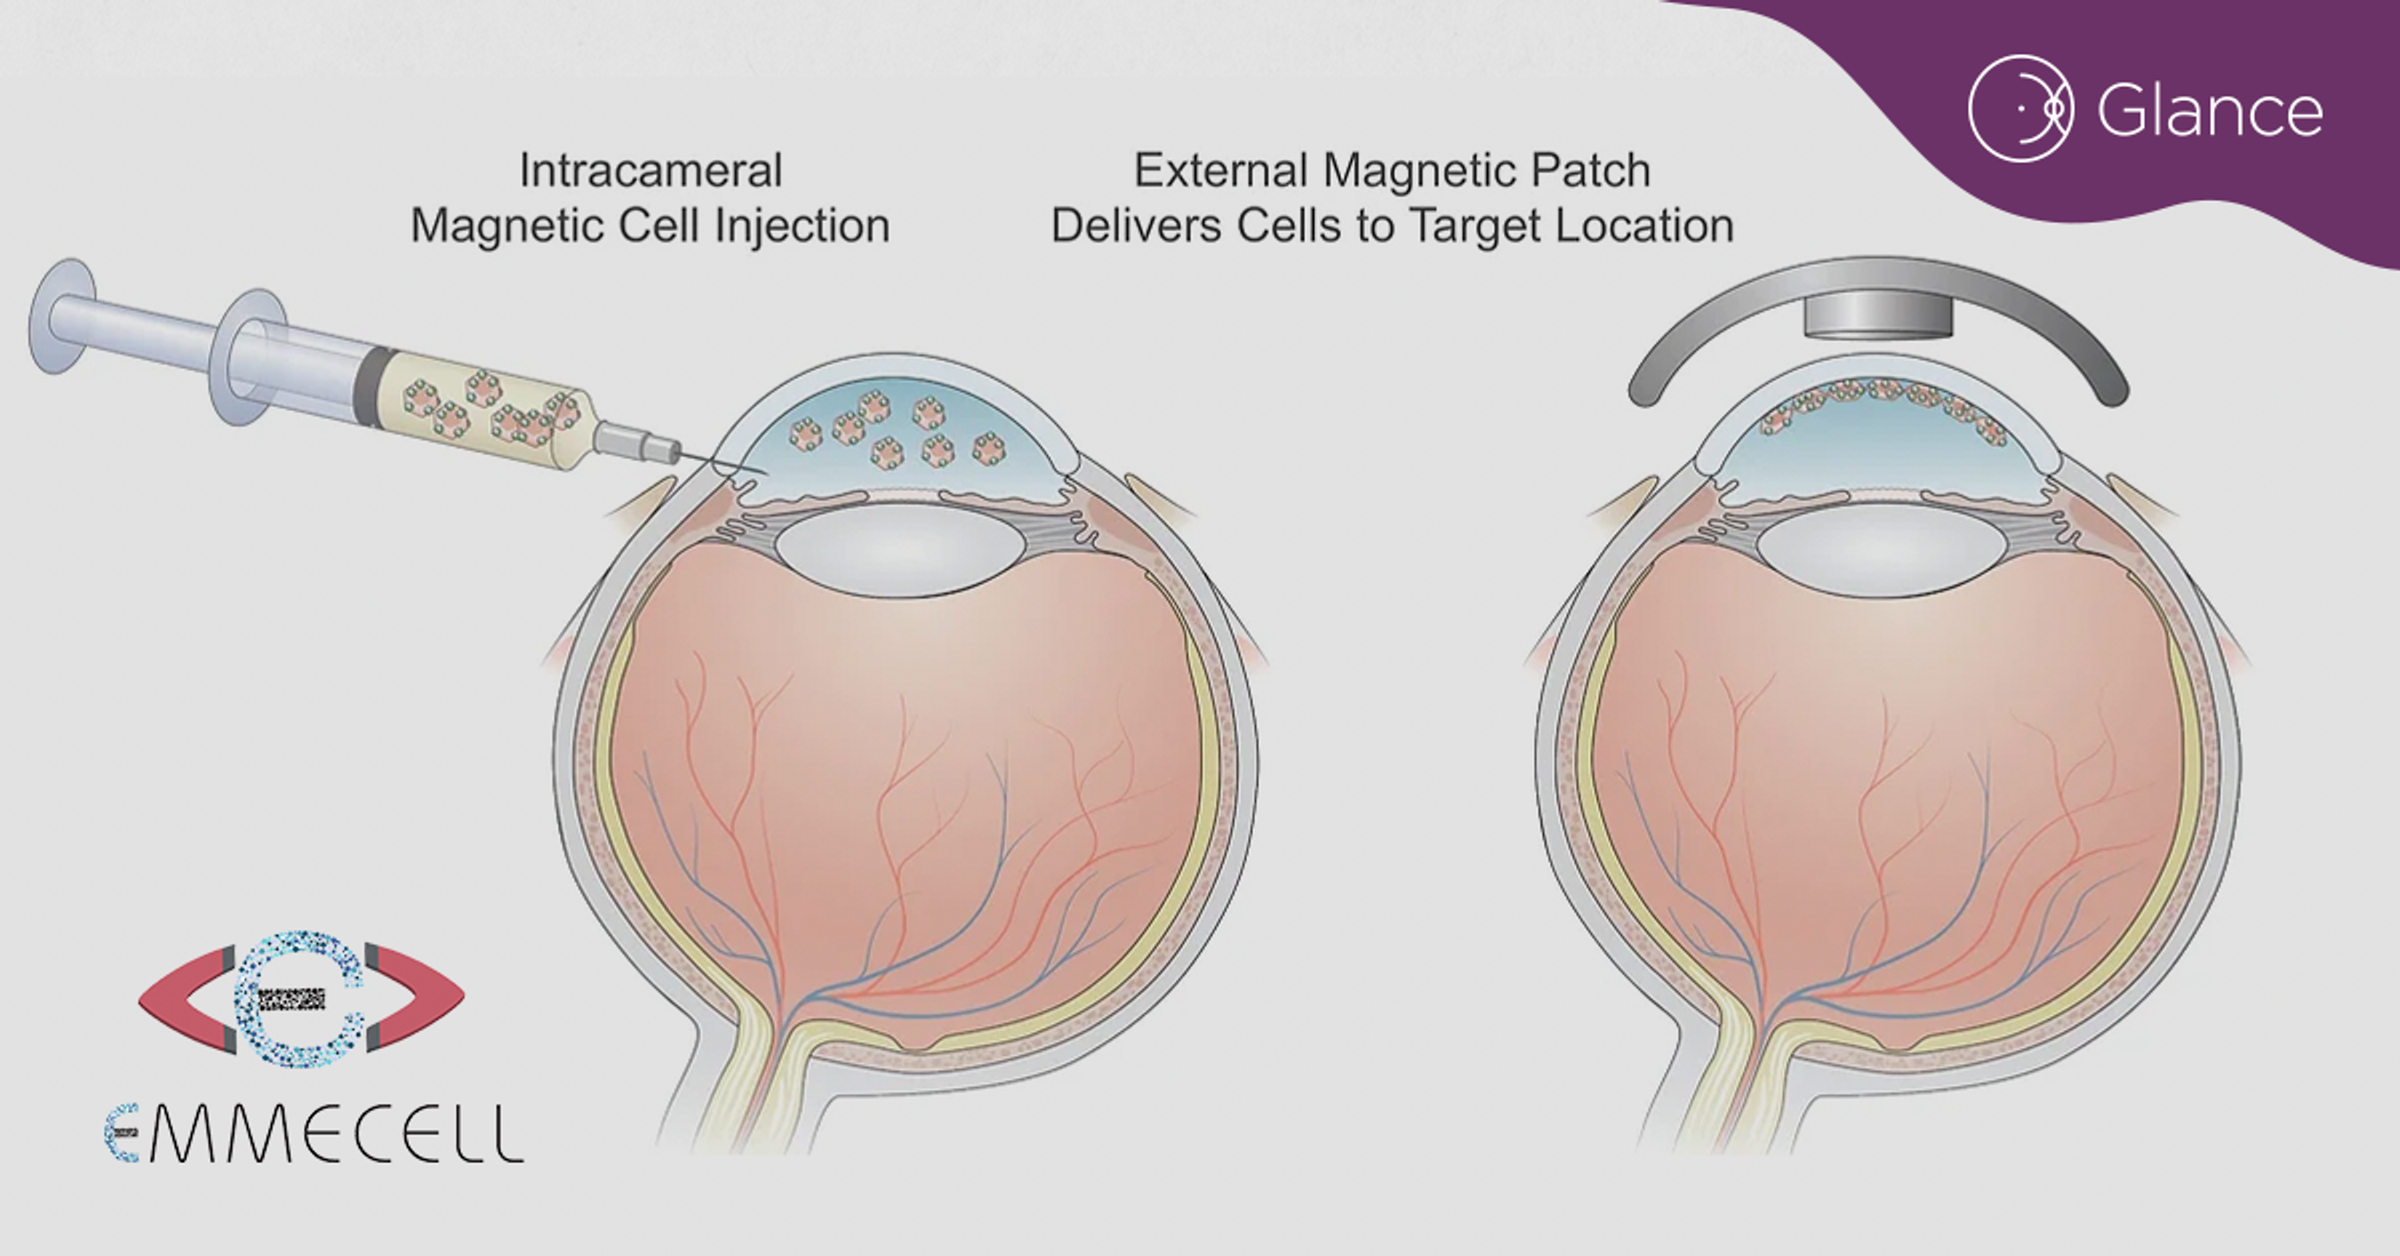 Cell therapy dosing concludes for Emmecell's corneal edema trial